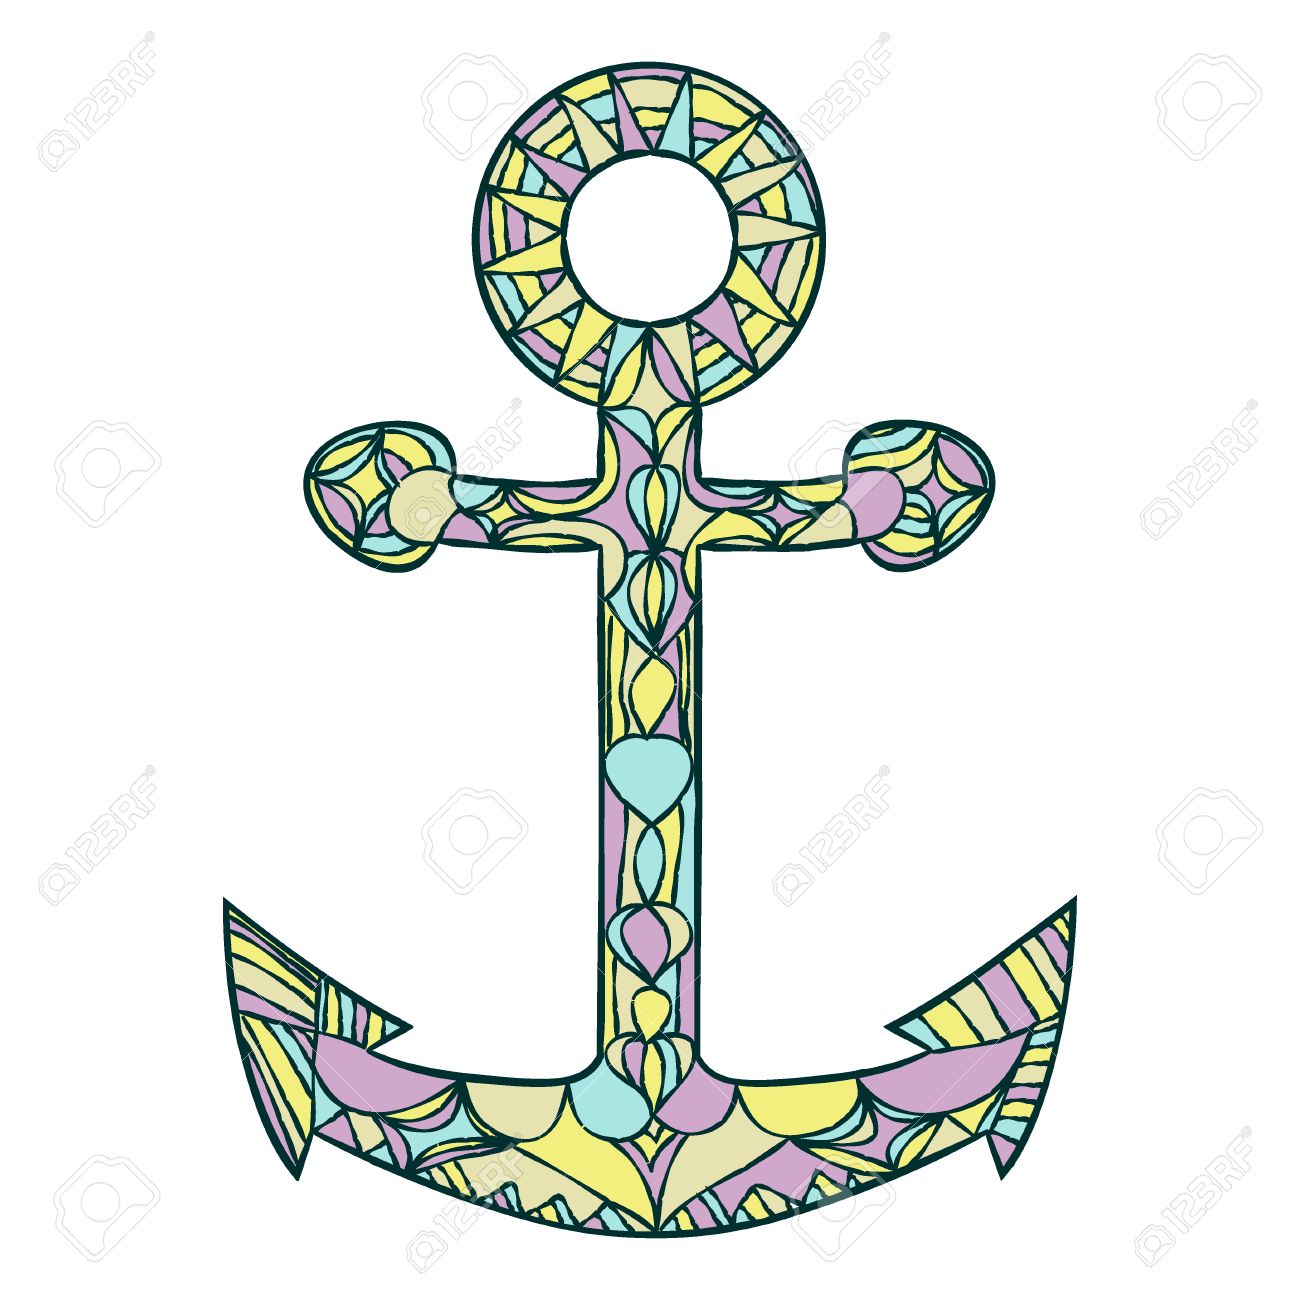 Free Anchor Clipart colored, Download Free Clip Art on Owips